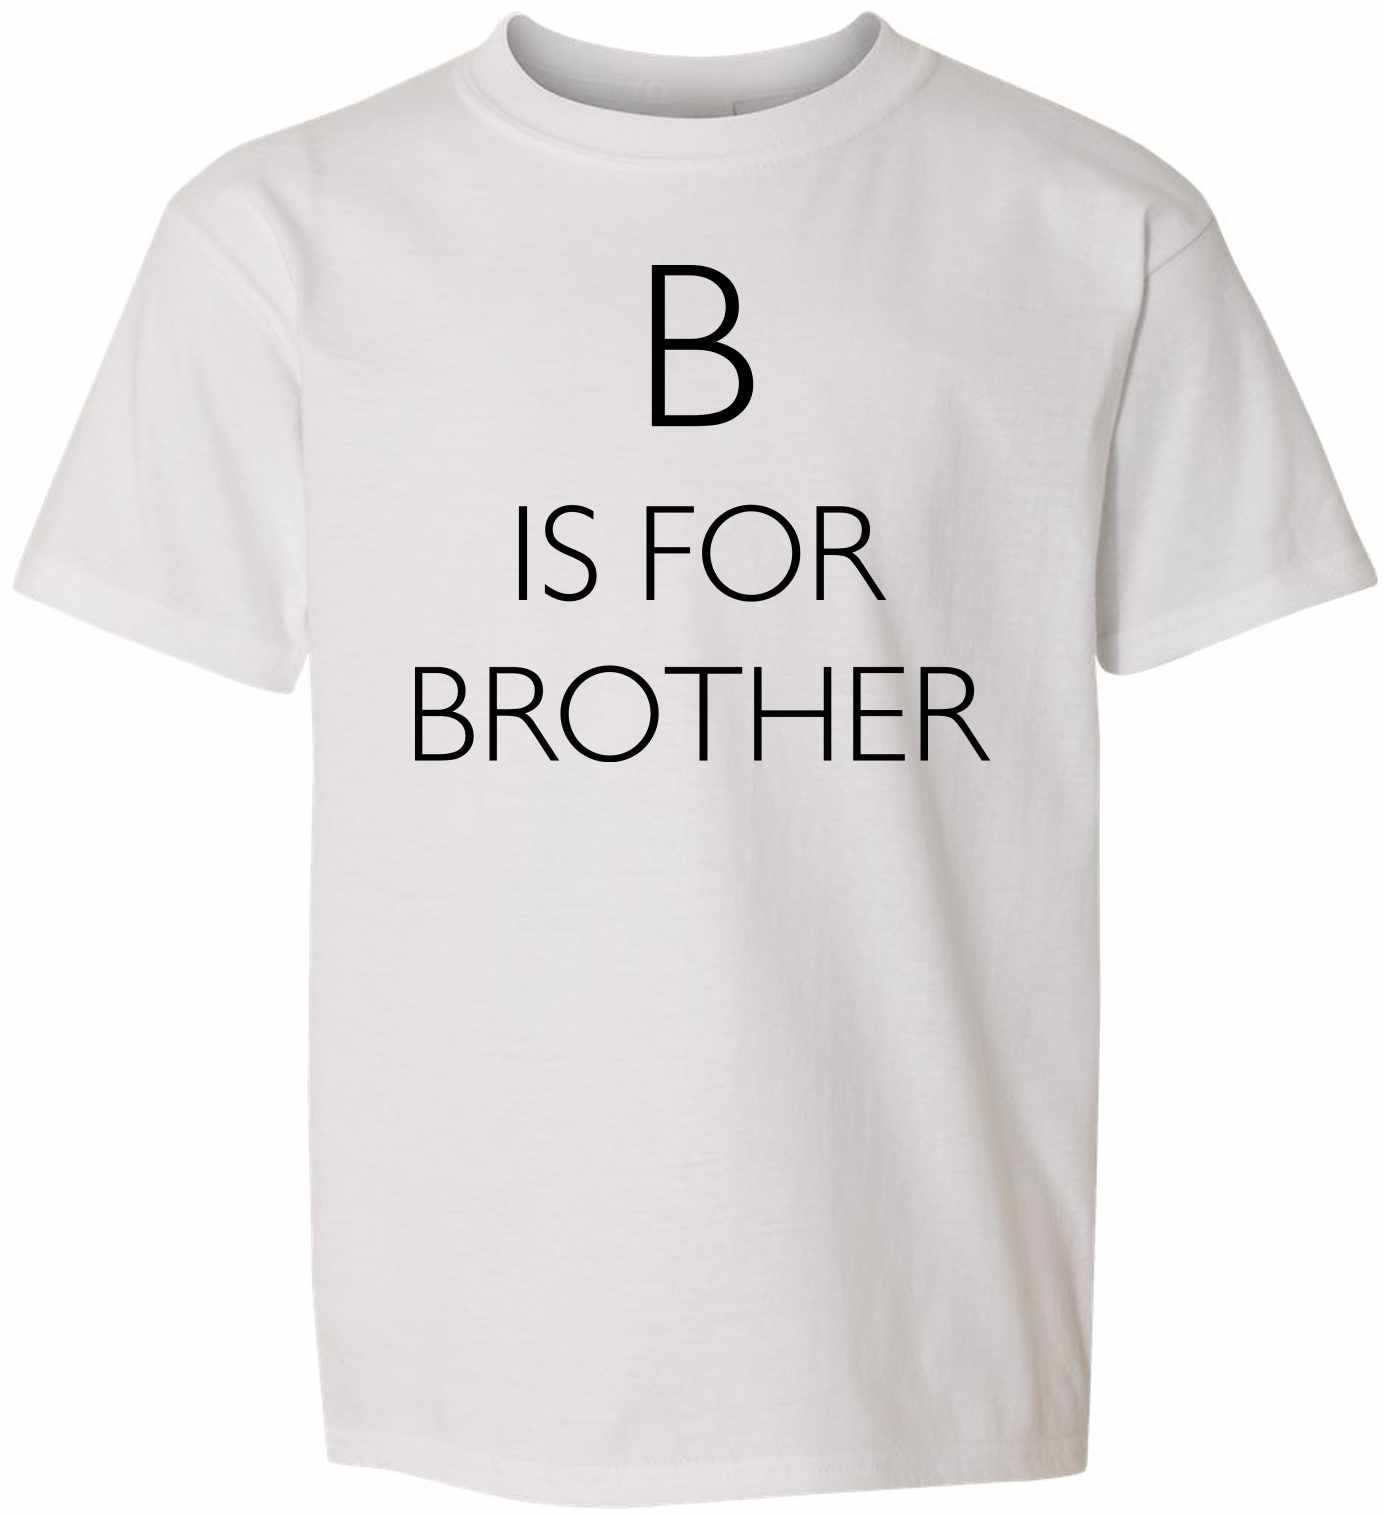 B is for Brother on Youth T-Shirt